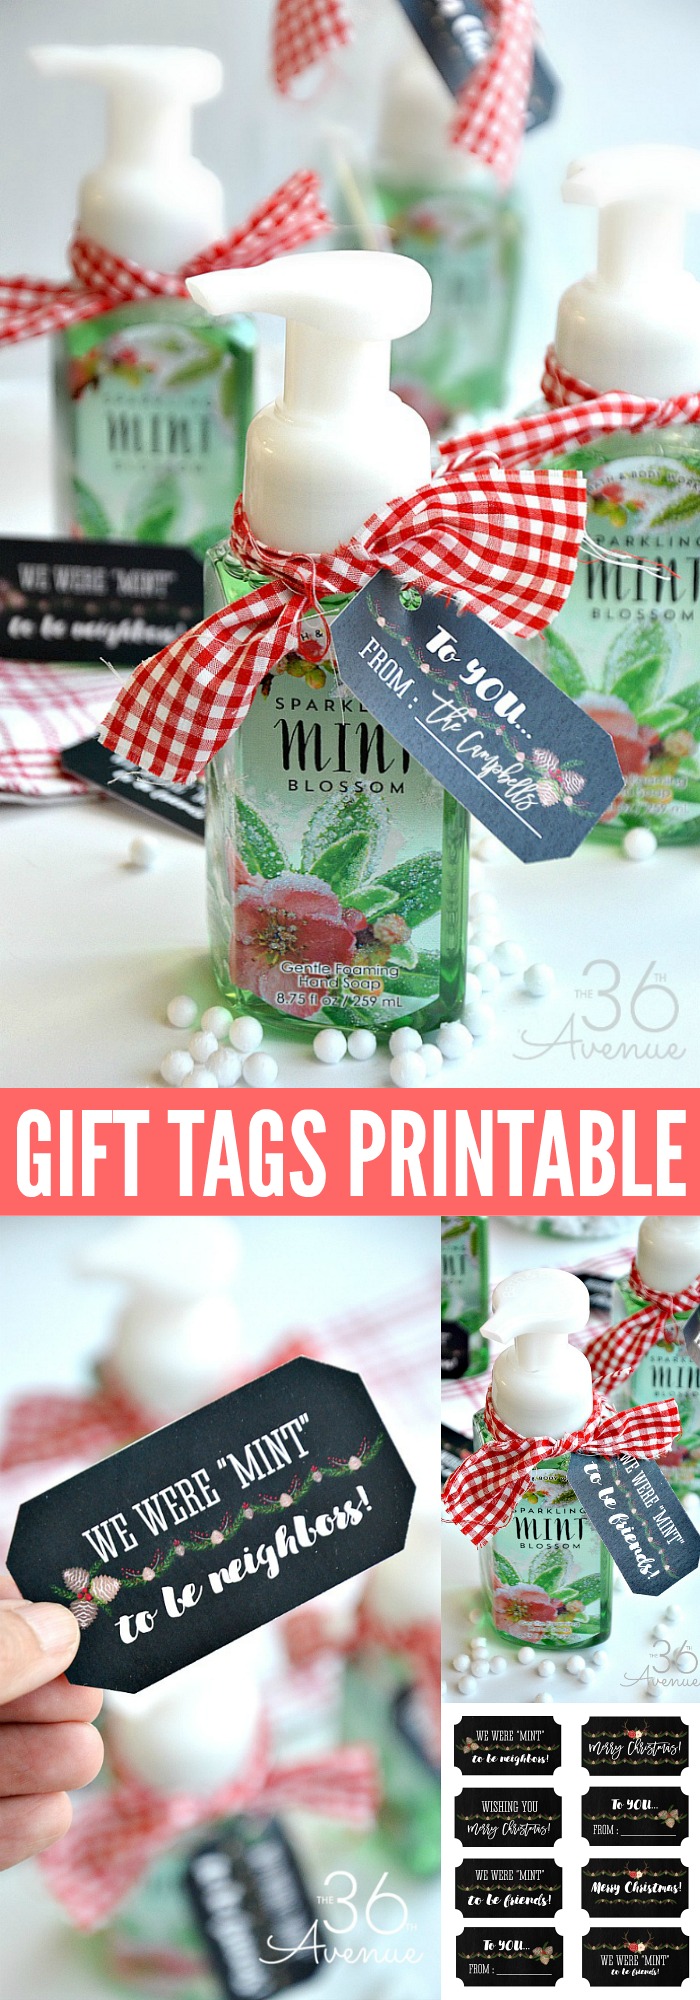 Christmas Gift Idea and Gift Tag Printable. Pin it now for later.